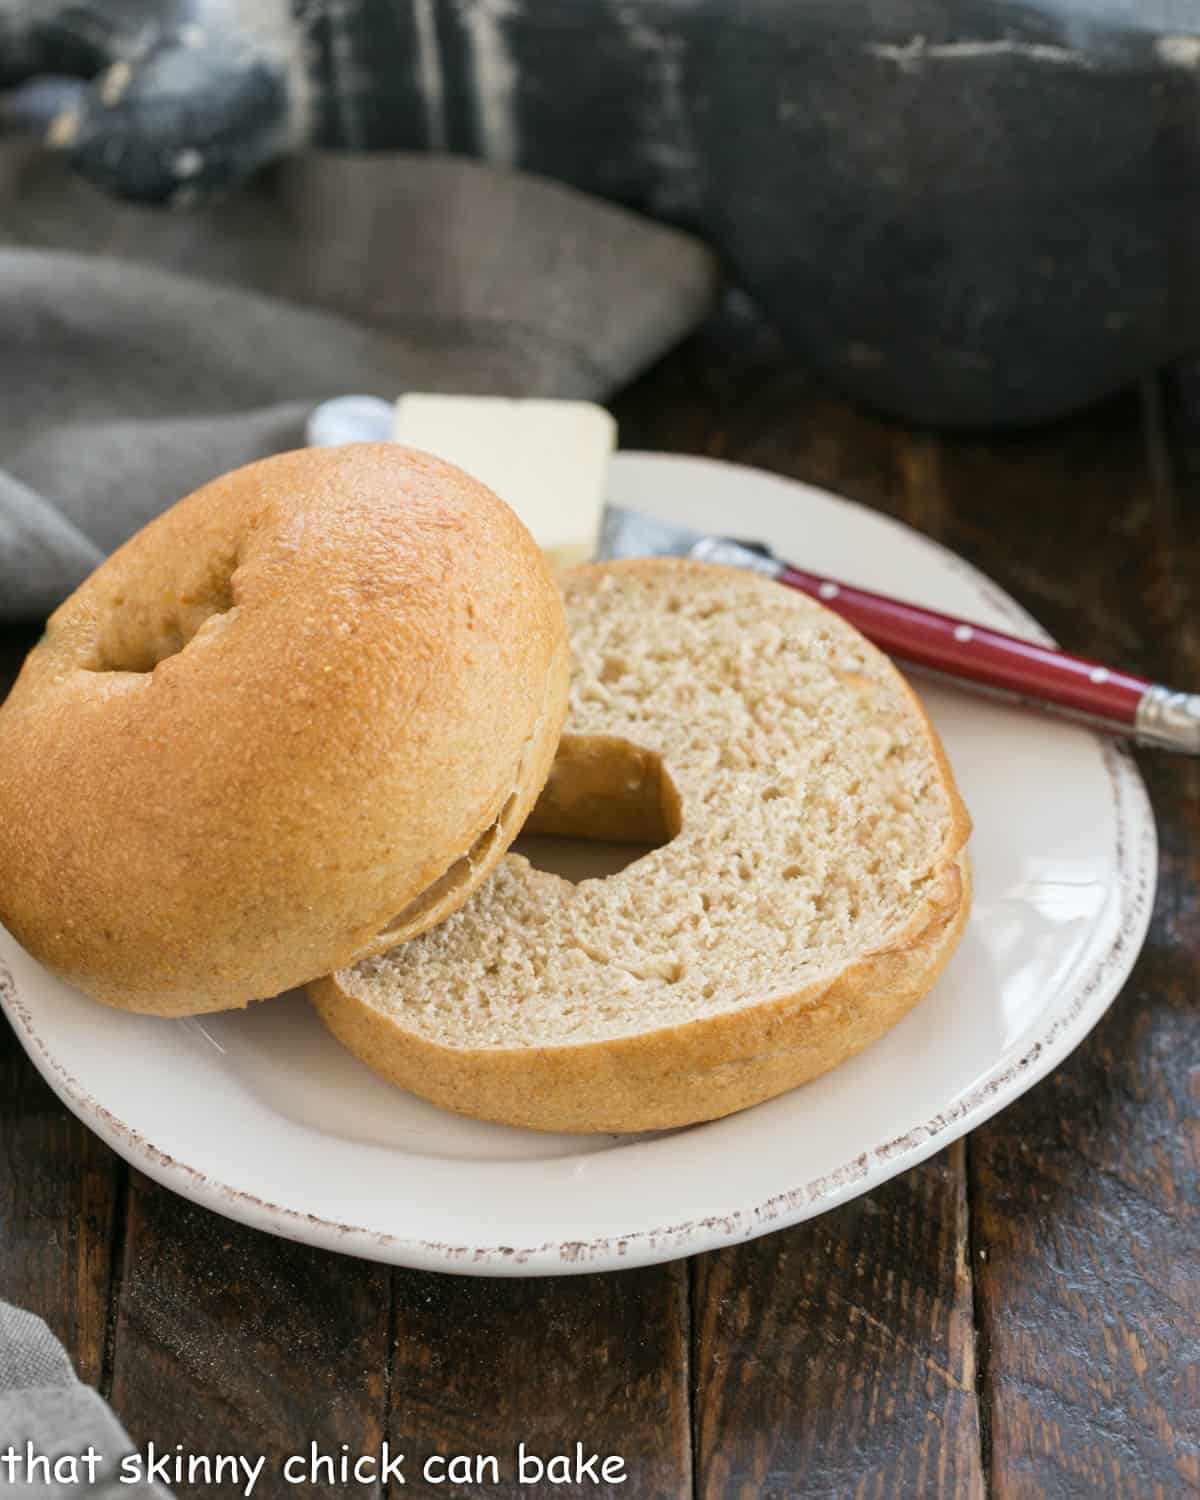 Sliced whole wheat bagel on a round white plate with a red handle knife.